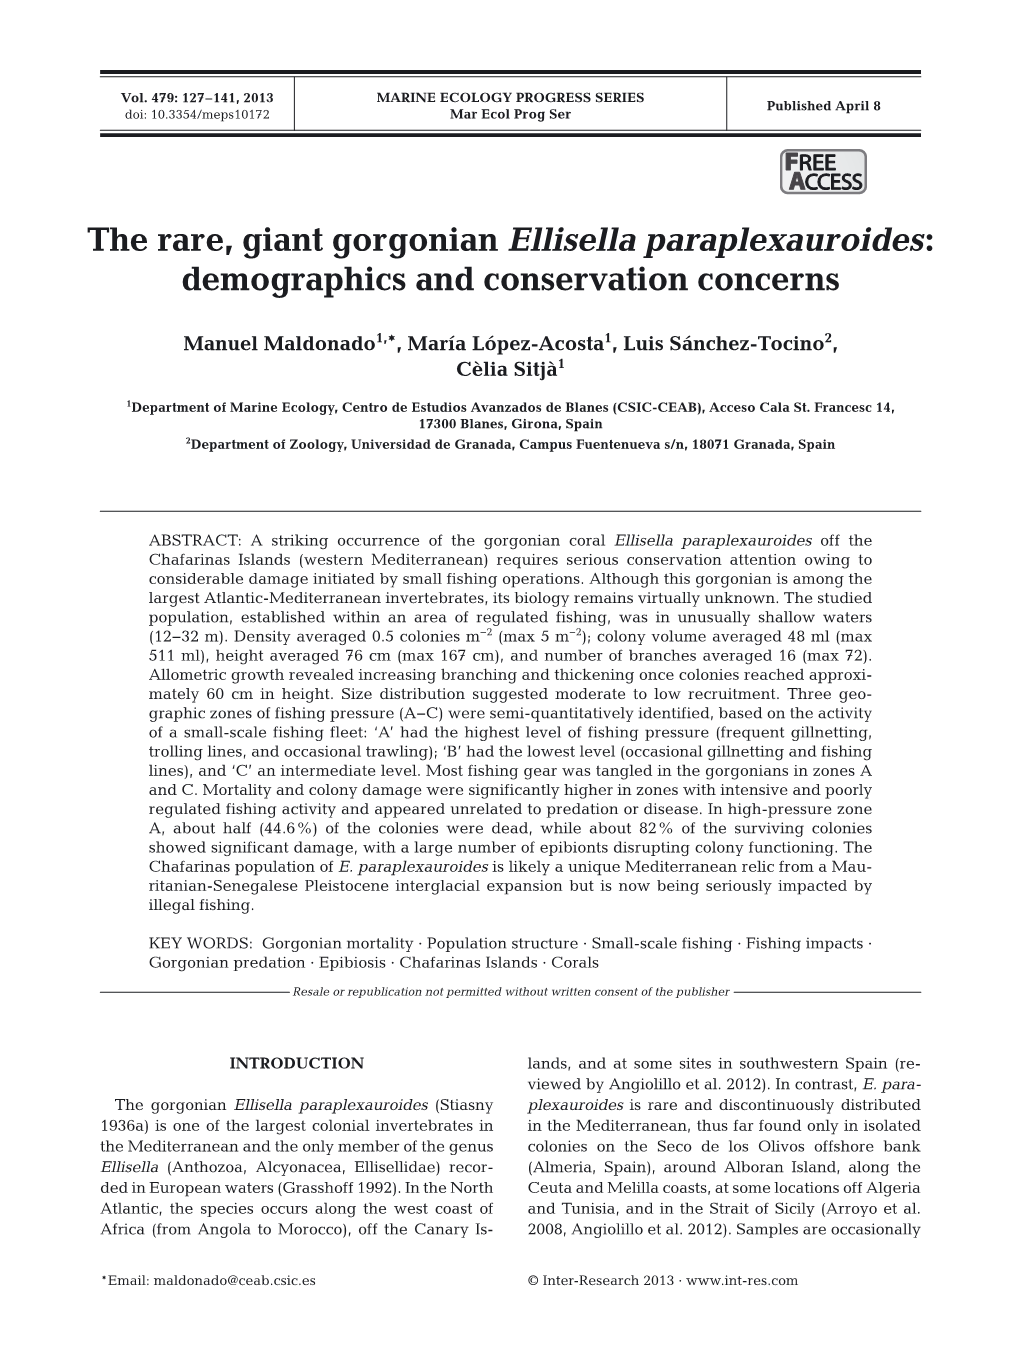 The Rare, Giant Gorgonian Ellisella Paraplexauroides: Demographics and Conservation Concerns